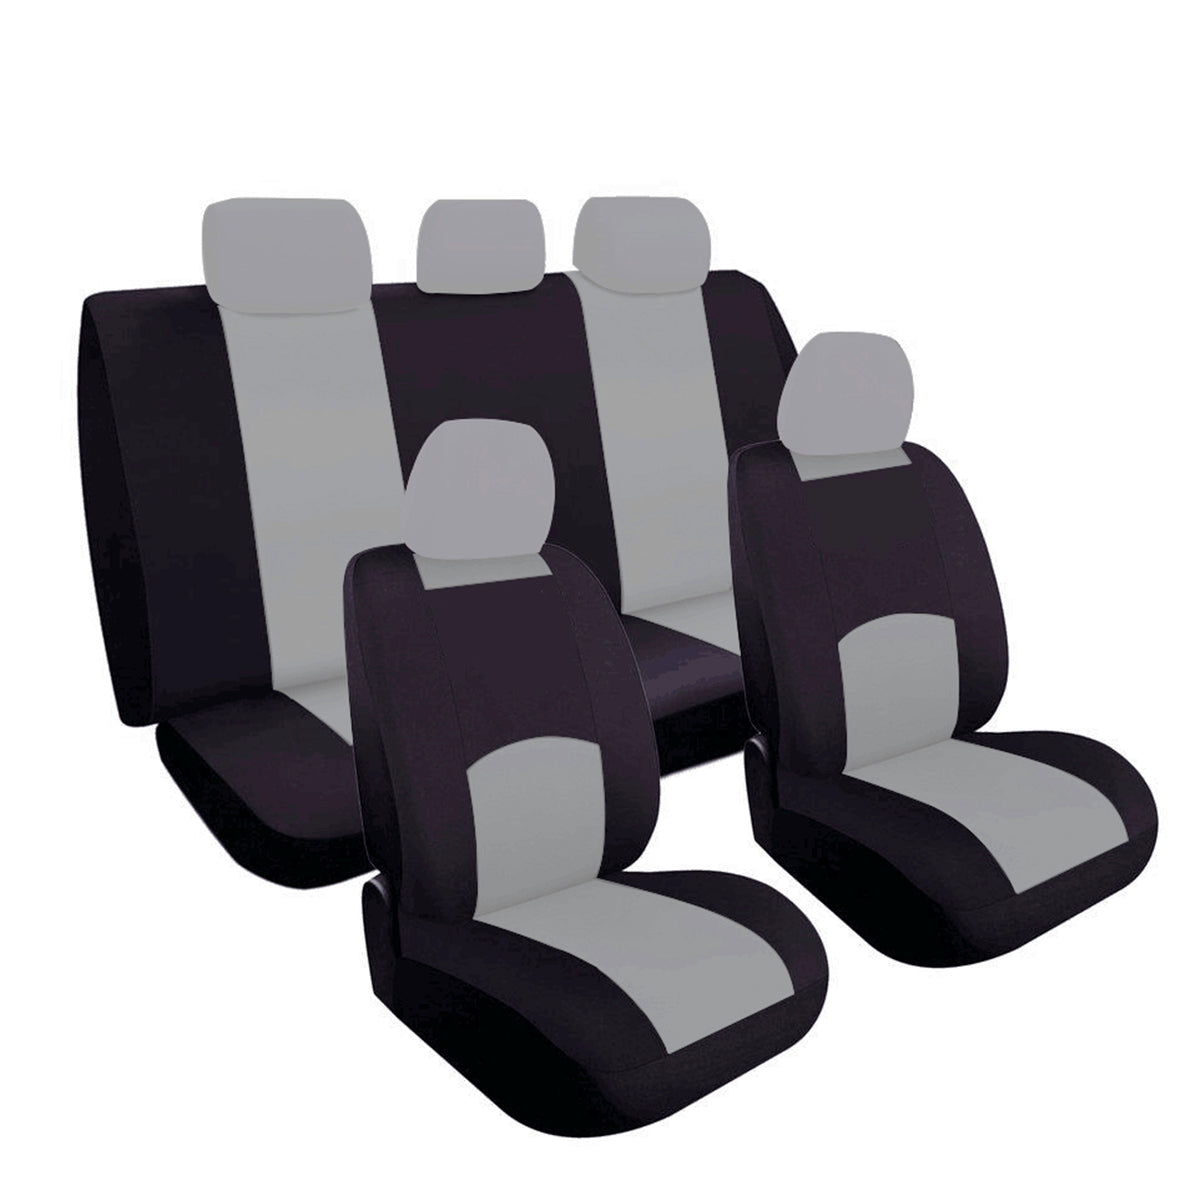 Black Universal Full Set Car Seat Covers Front Rear Fit For Sedan Truck SUV 5 Heads